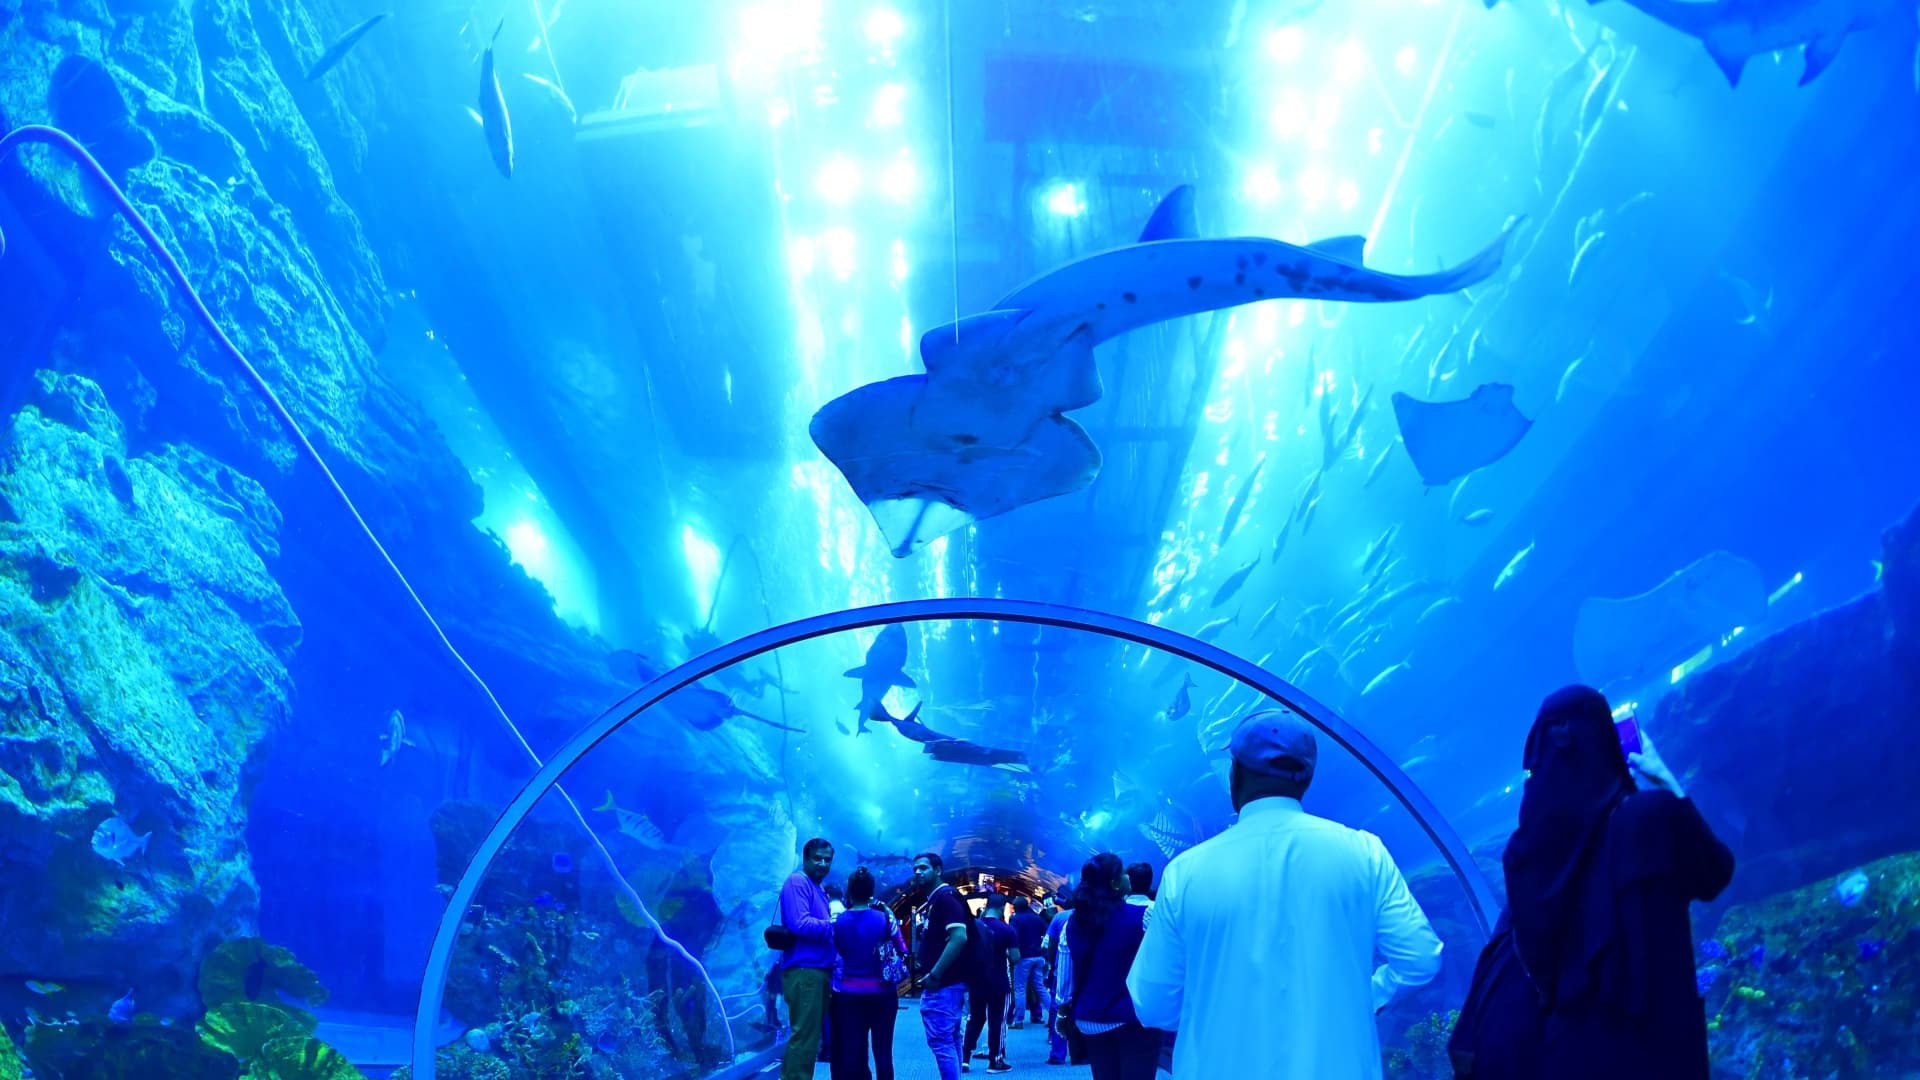 The record-breaking Dubai Mall is also home to the world's largest shopping mall aquarium, where visitors can cage snorkel and dive with sharks.